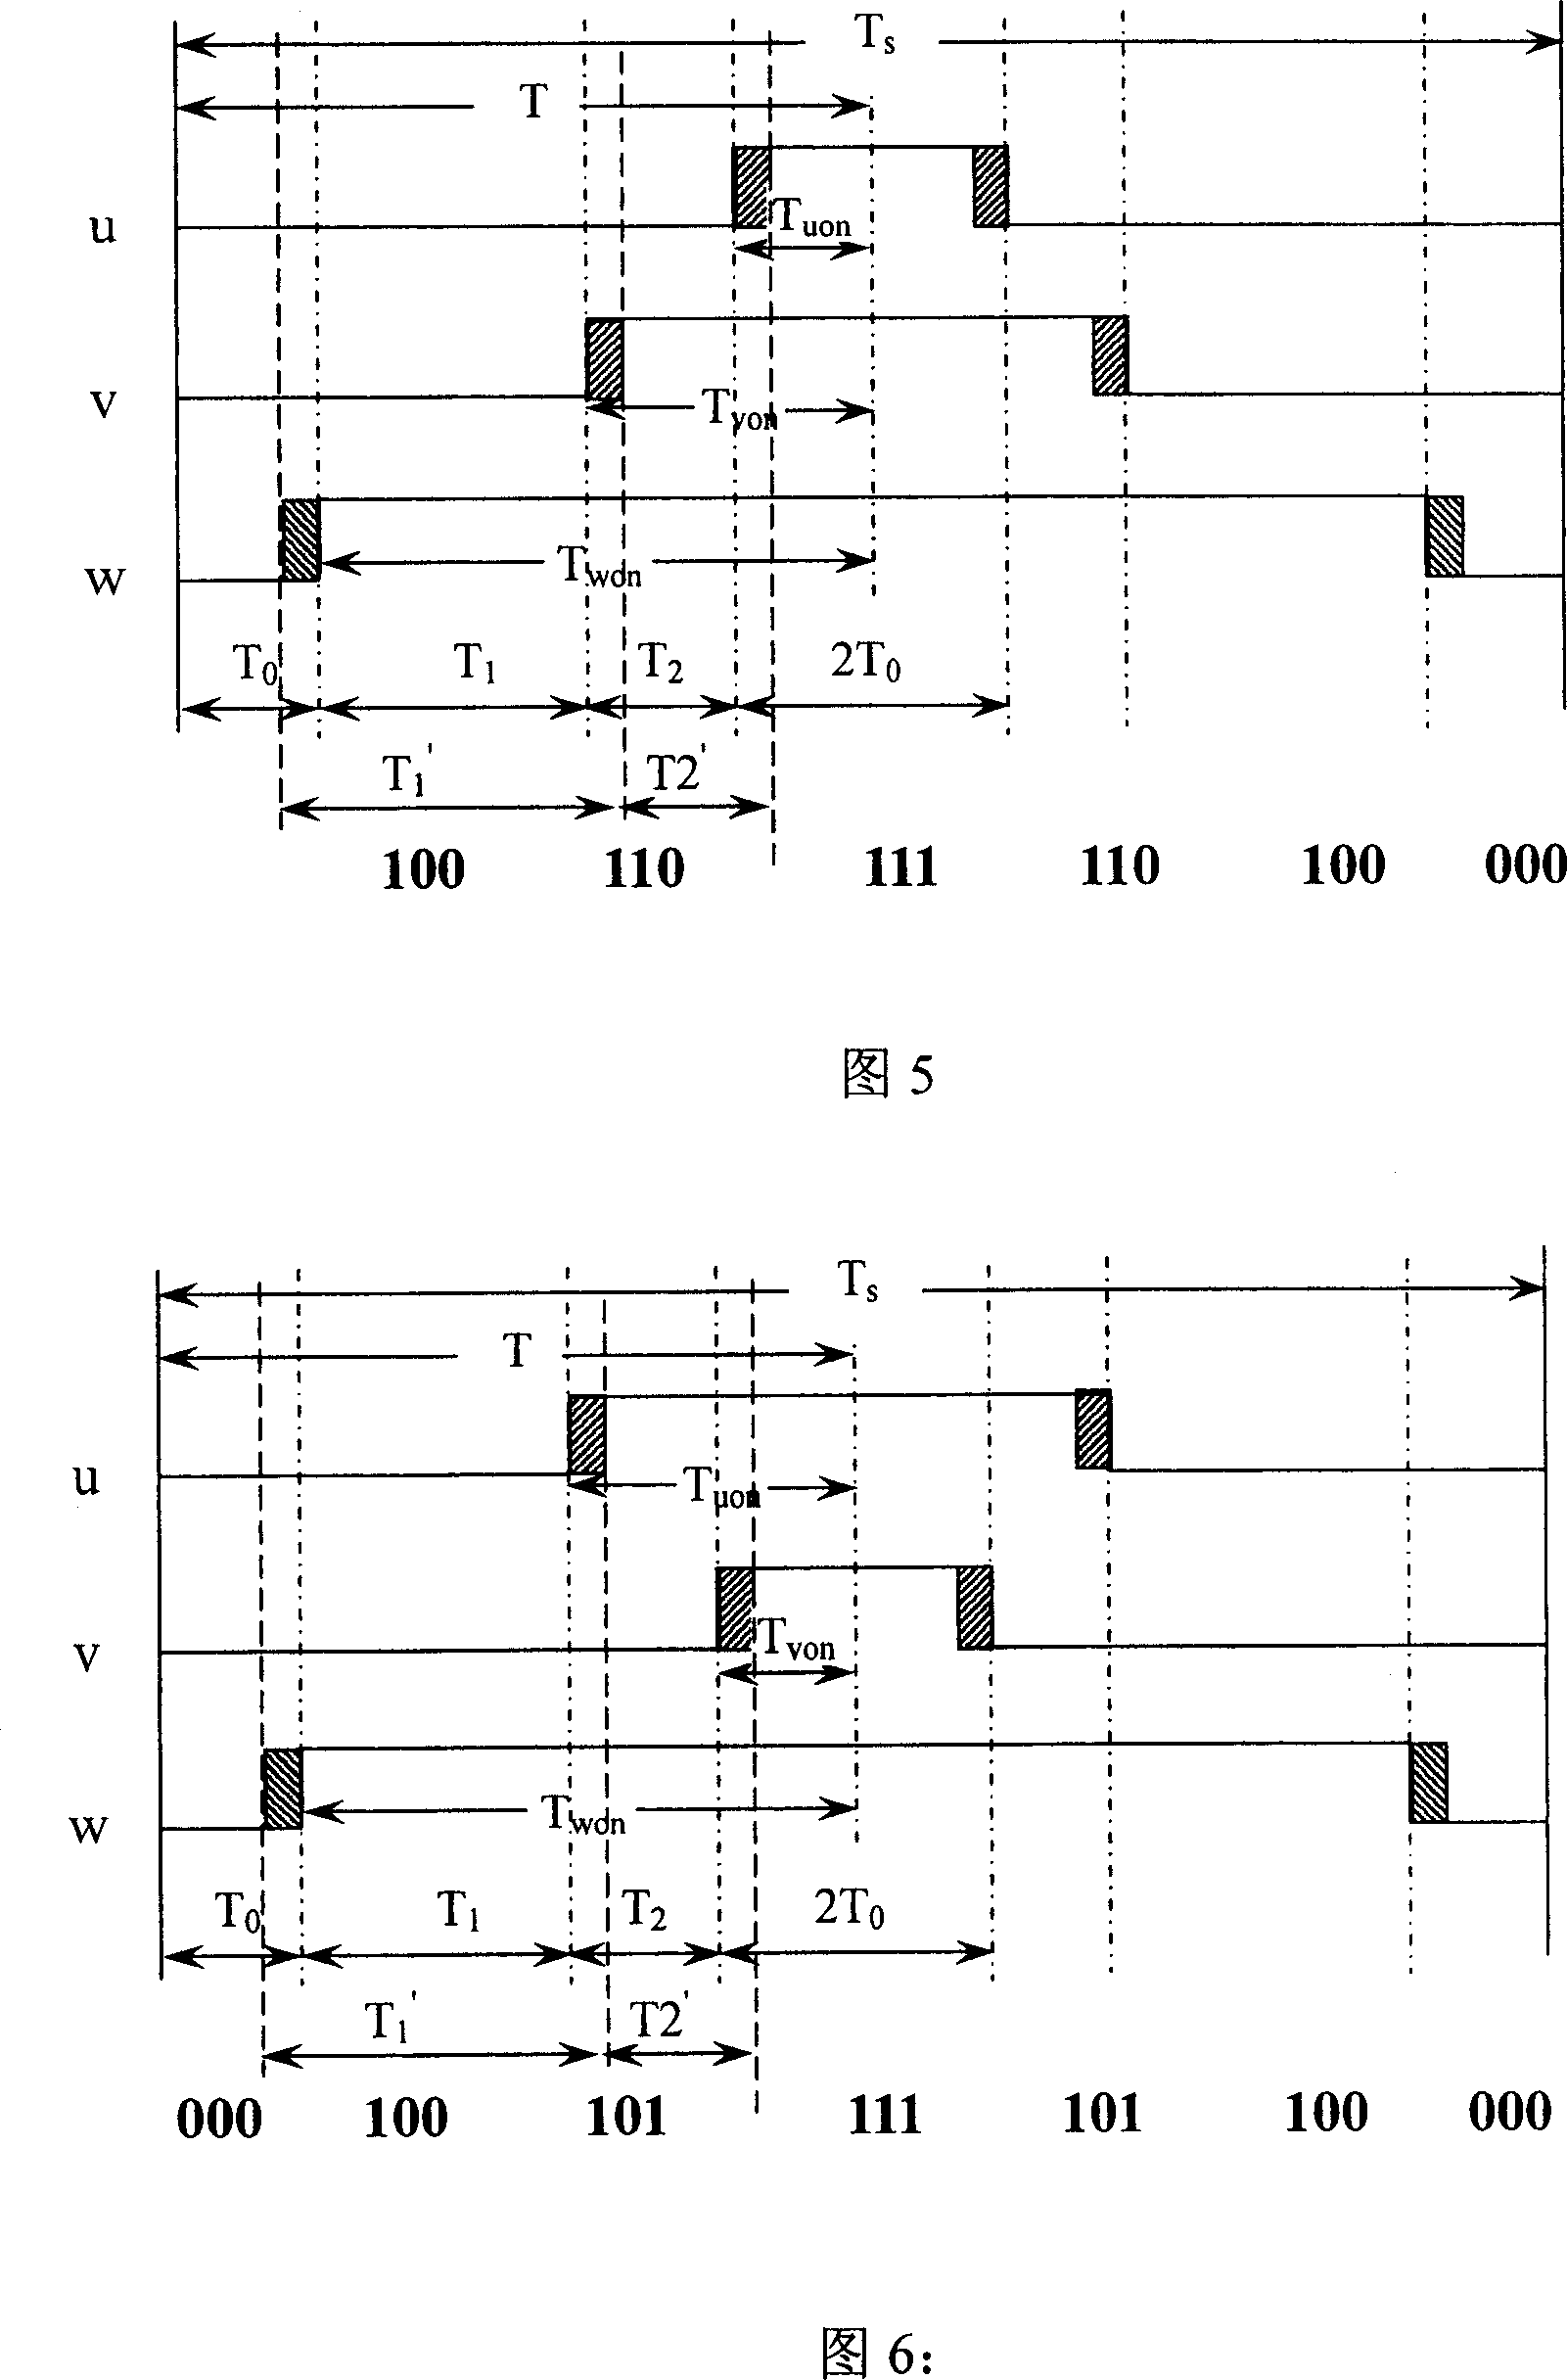 Dead zone compensating method for space vector pulse width modulating output